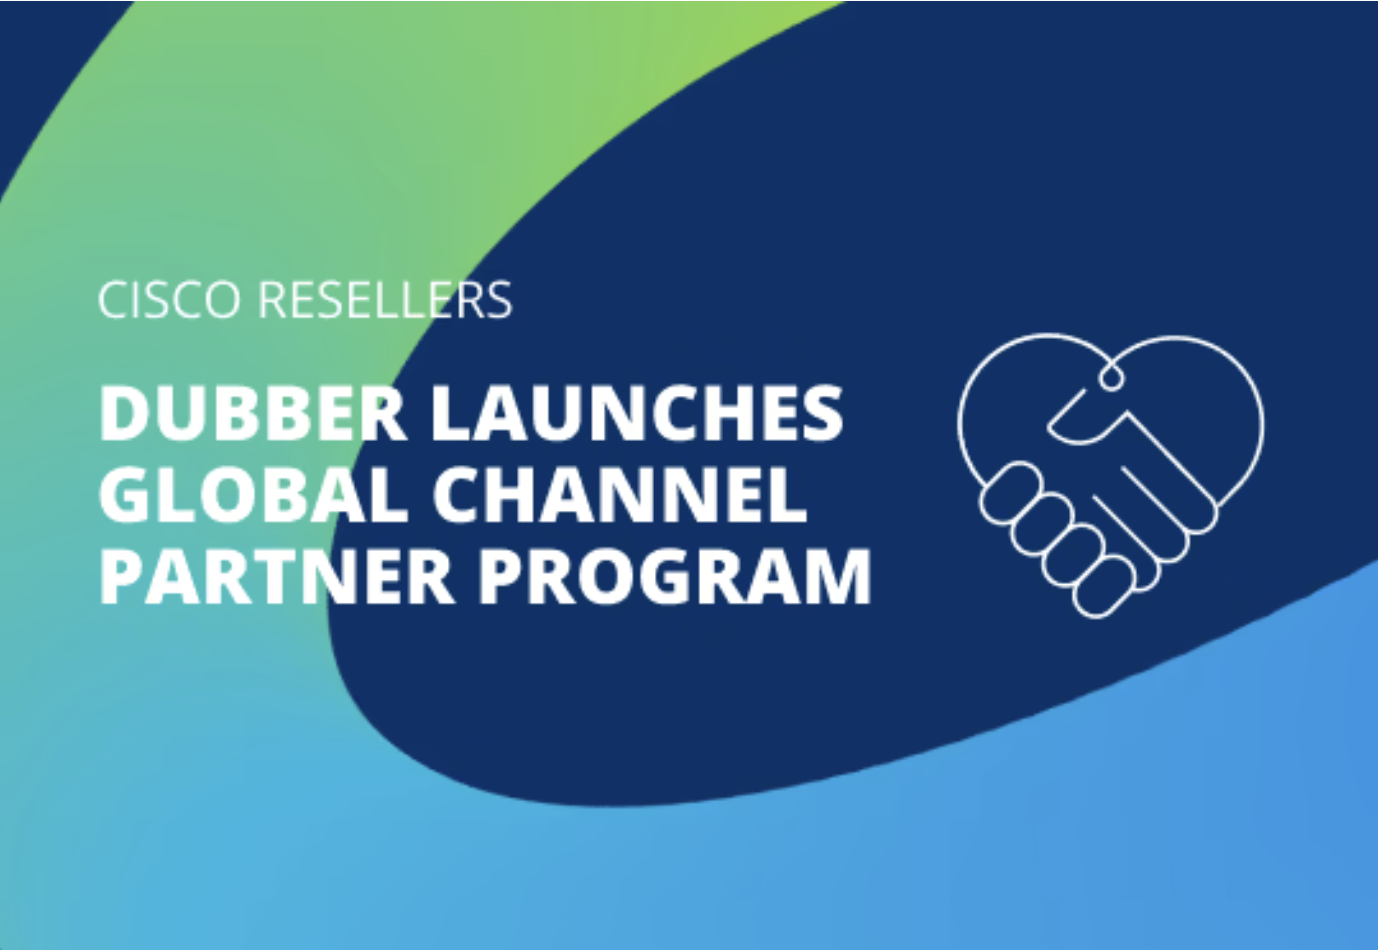 Dubber Launches Global Channel Partner Program for Cisco Resellers